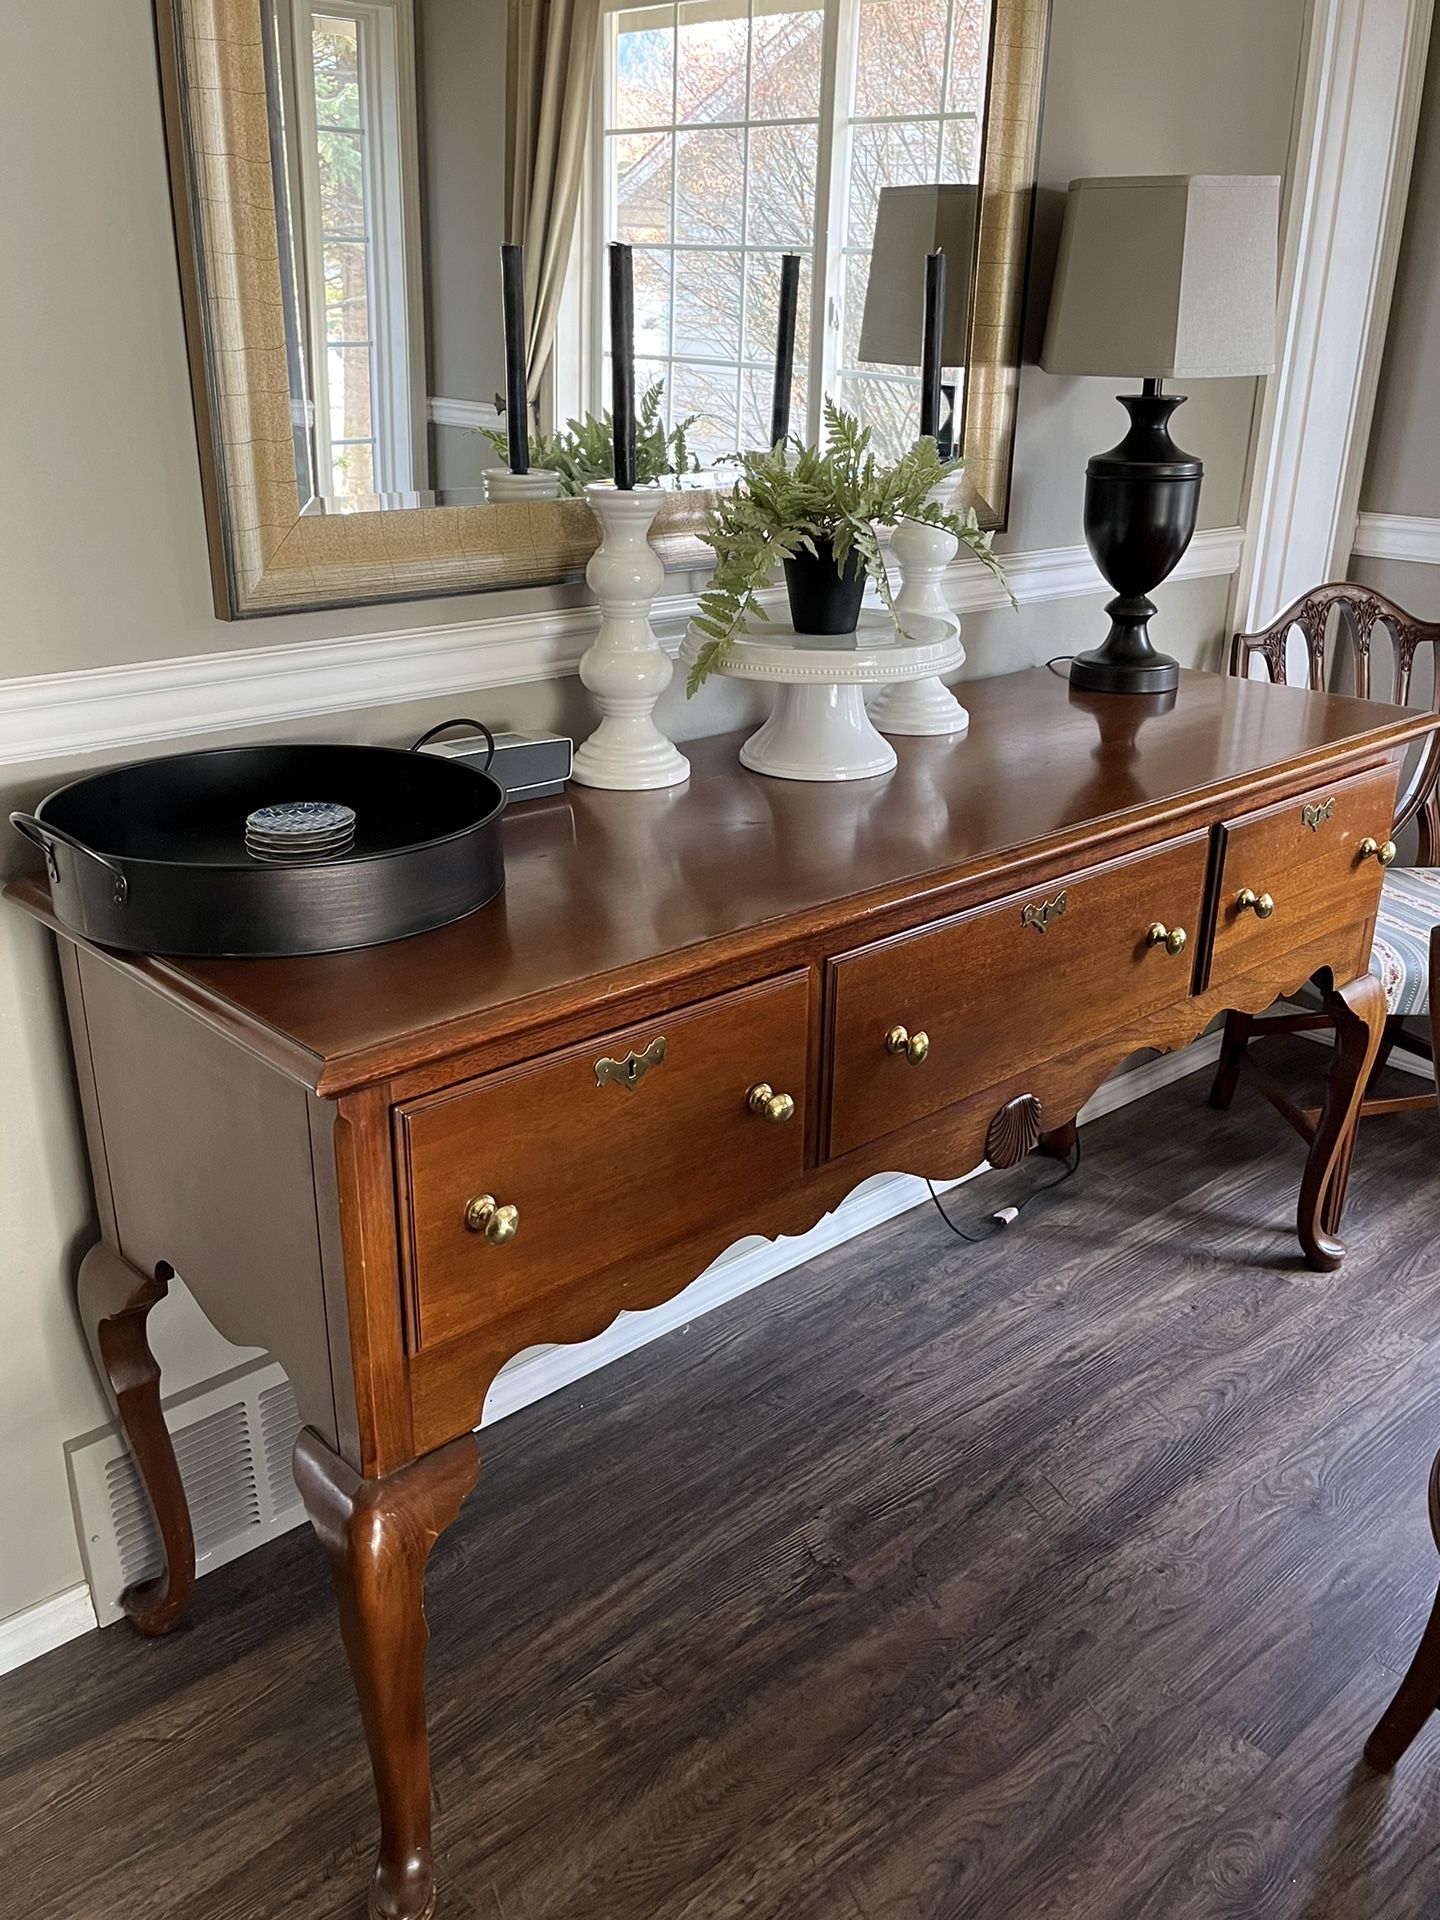 Mahogany Dining Table with Antique Chairs, China Hutch and Buffet